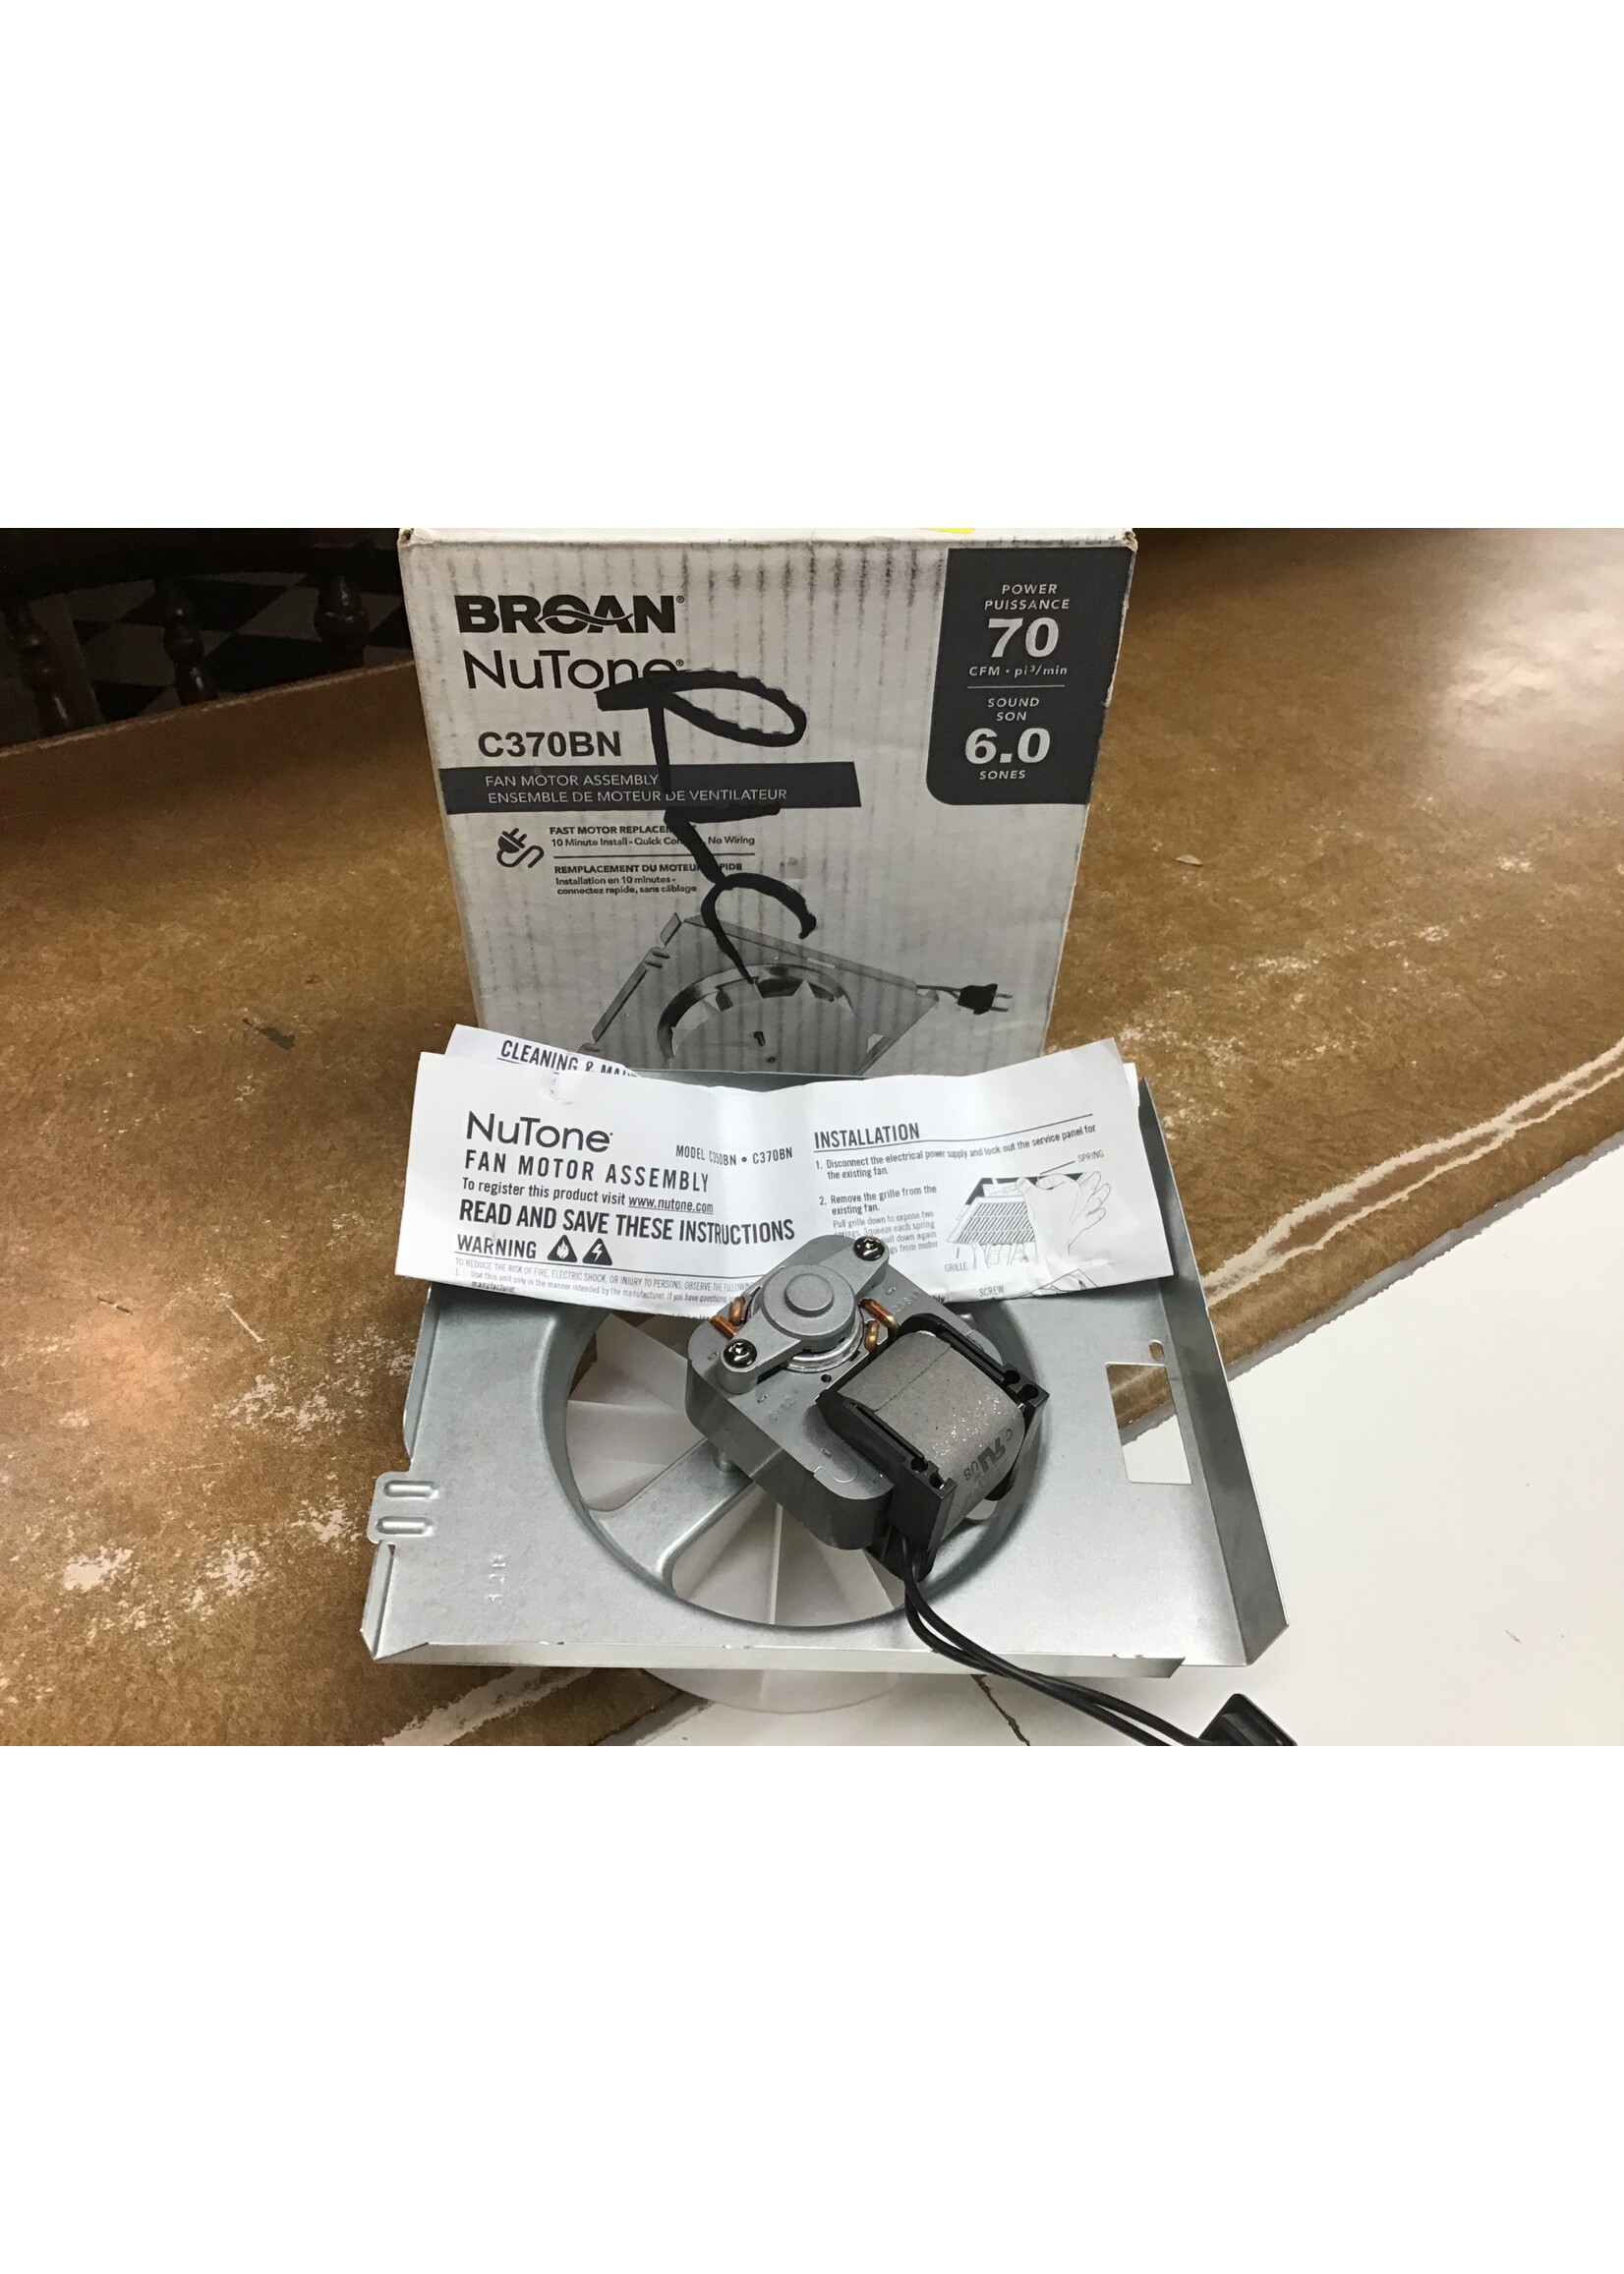 Broan NuTone C370BN Fan Motor Assembly replacement